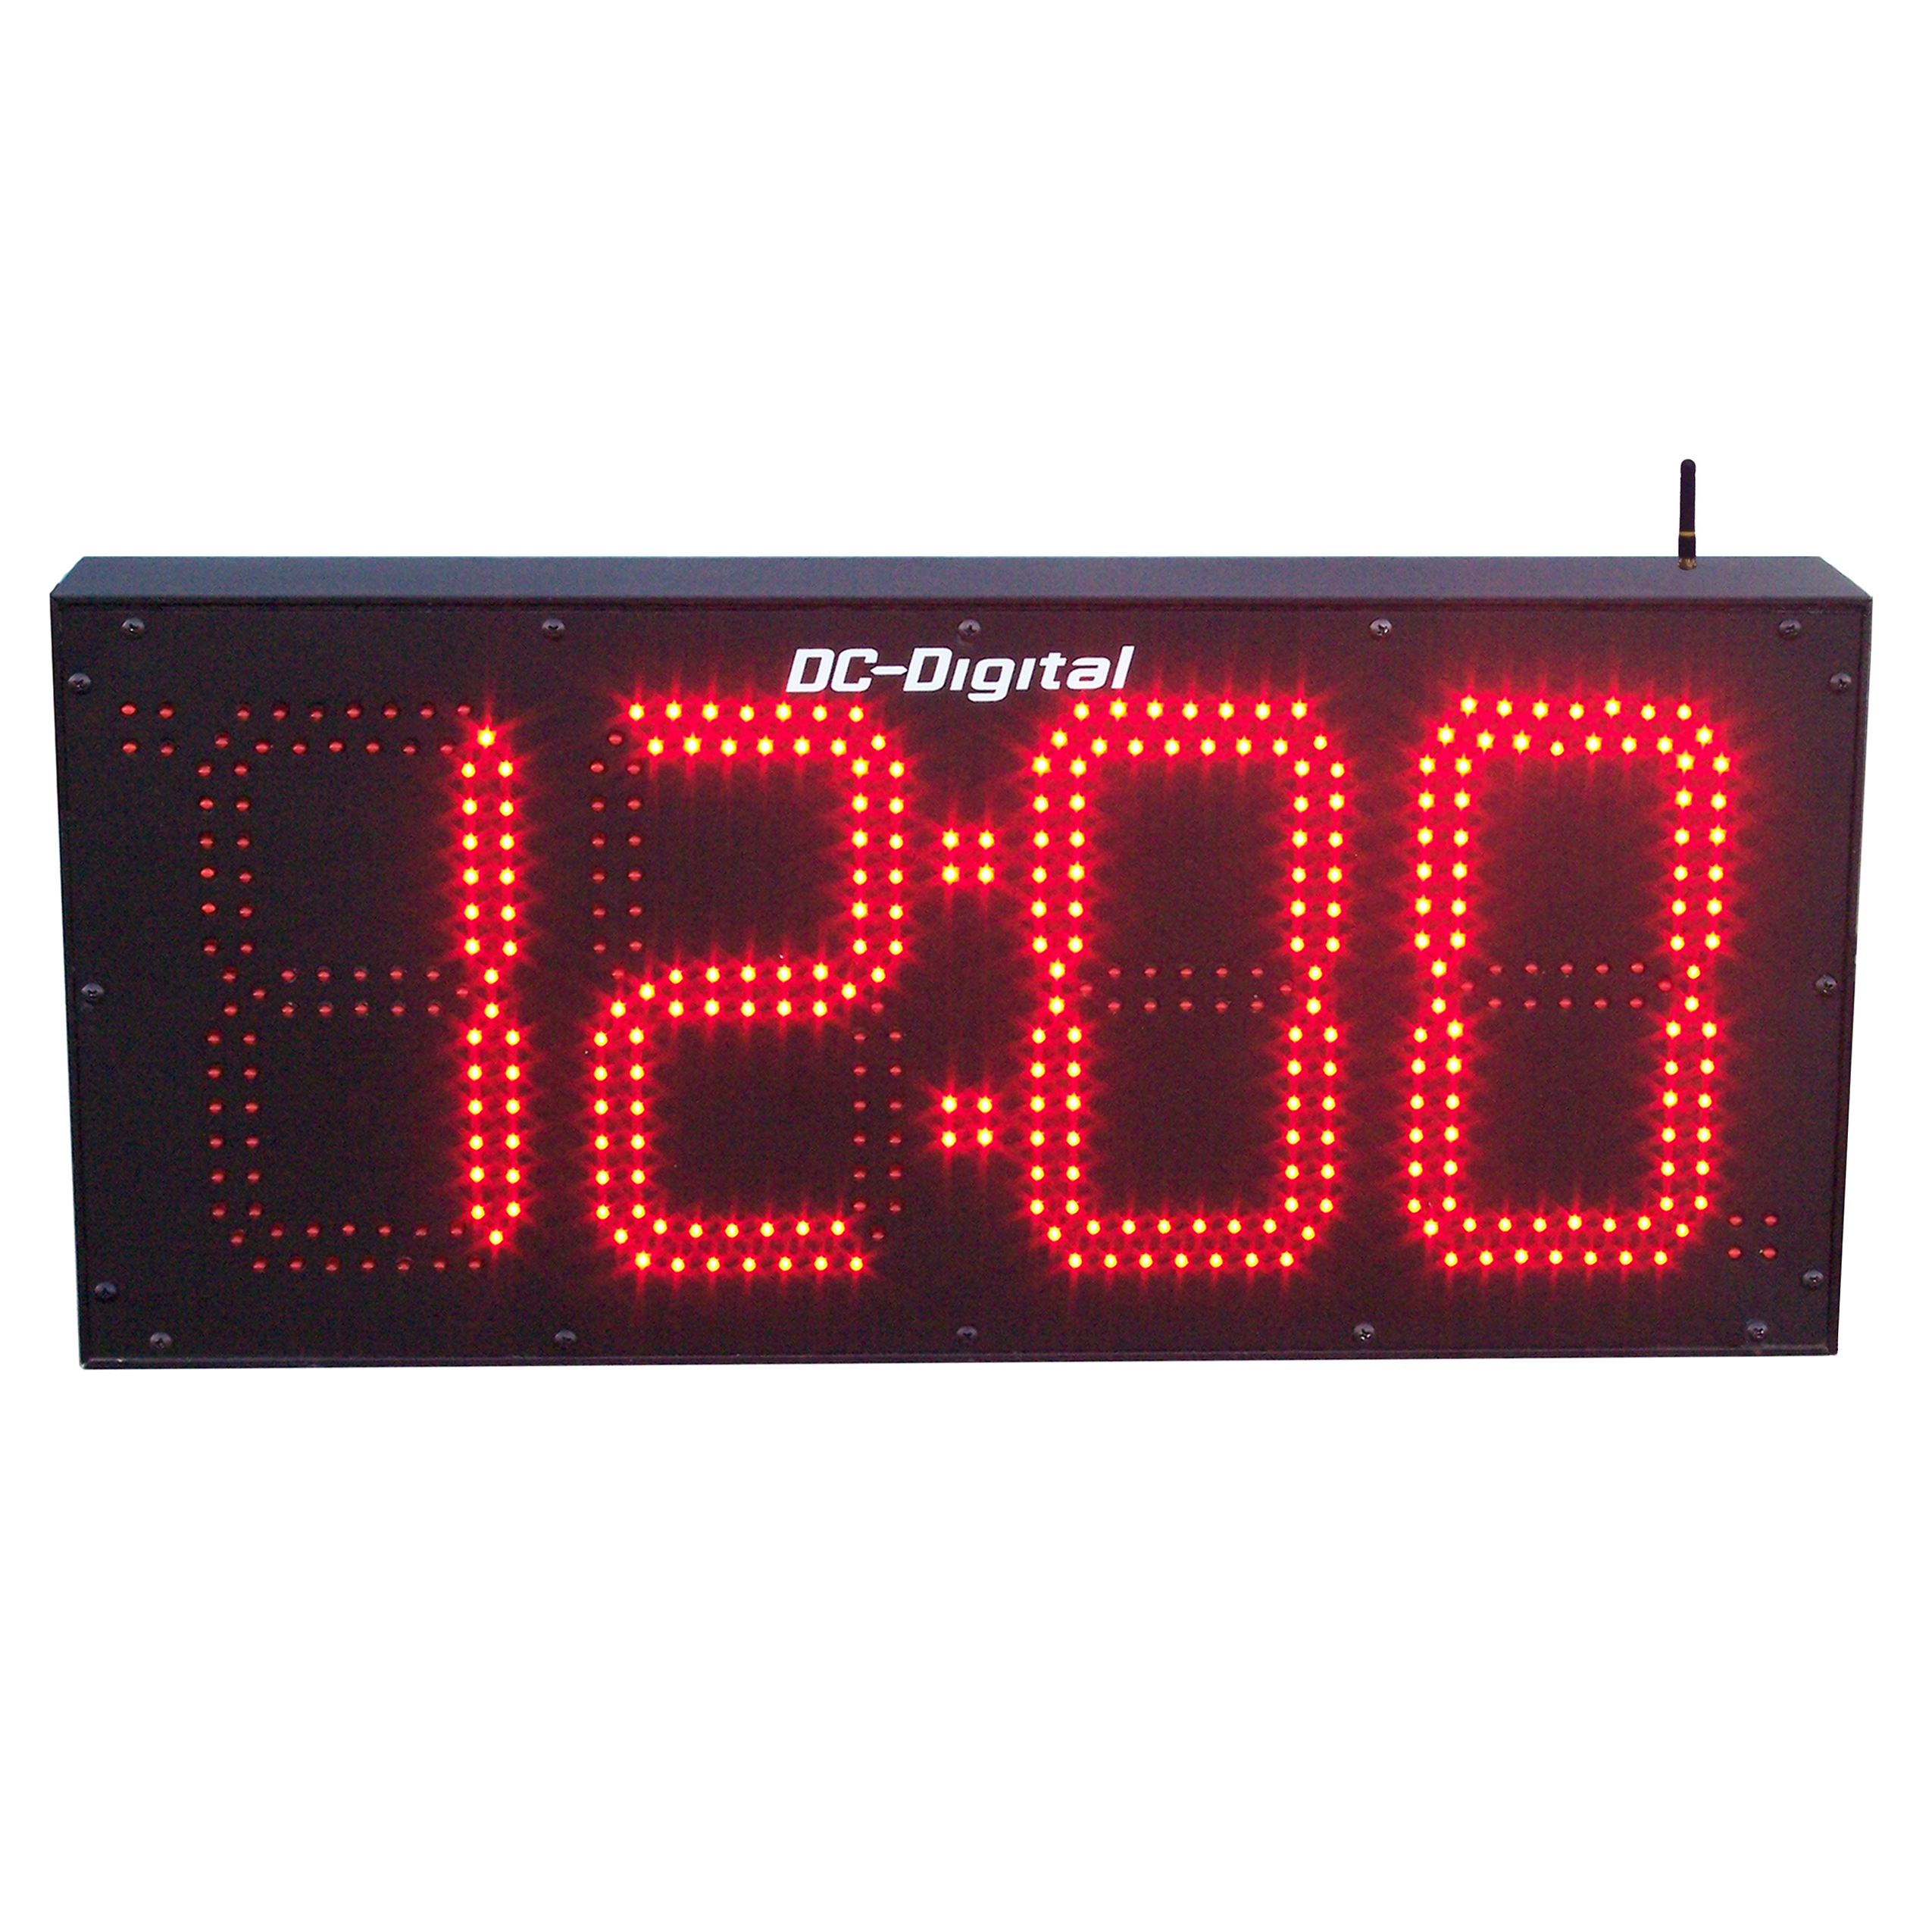 (DC-80-W-System-IN) 8.0 Inch LED Digital, RF-Wireless Synchronized System, Time of Day Clock, with Store and Forward (INDOOR)